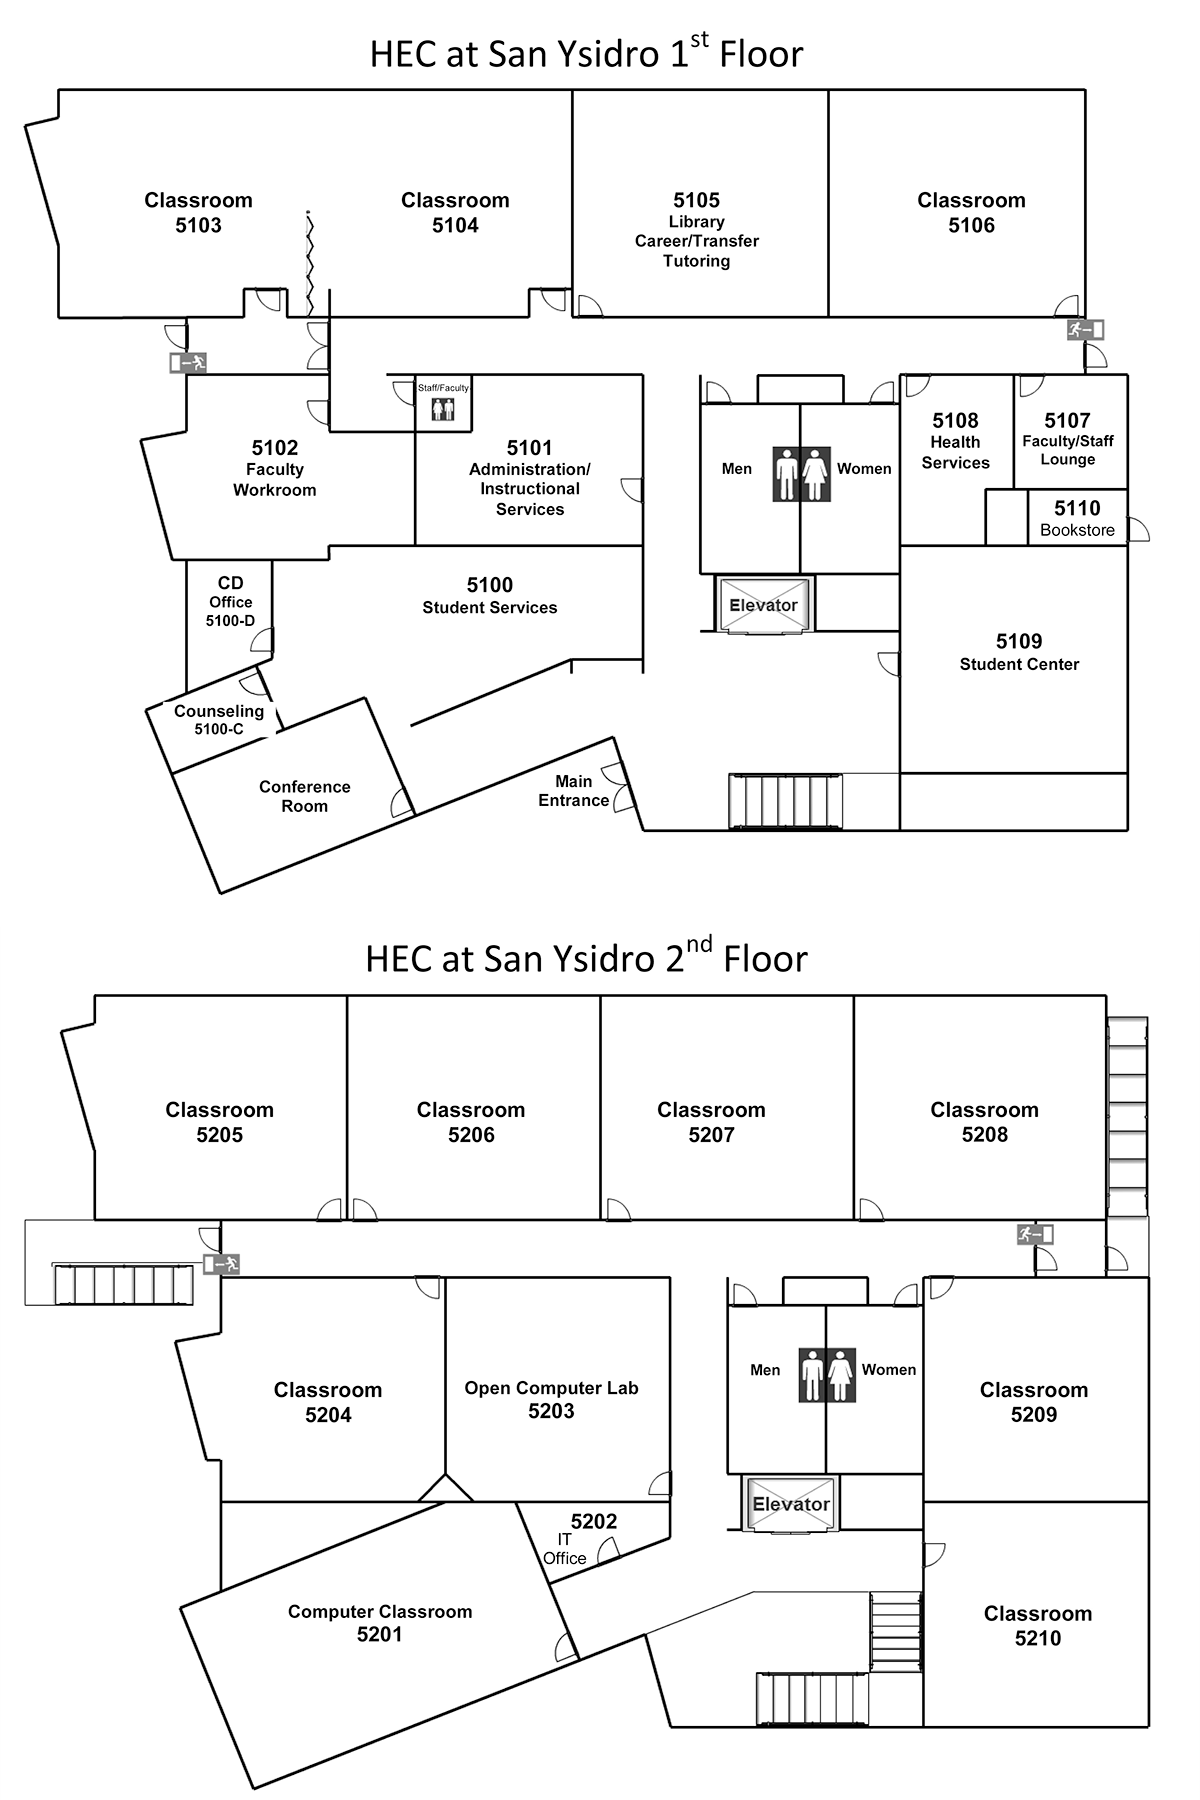 Campus Map for HEC San Ysidro